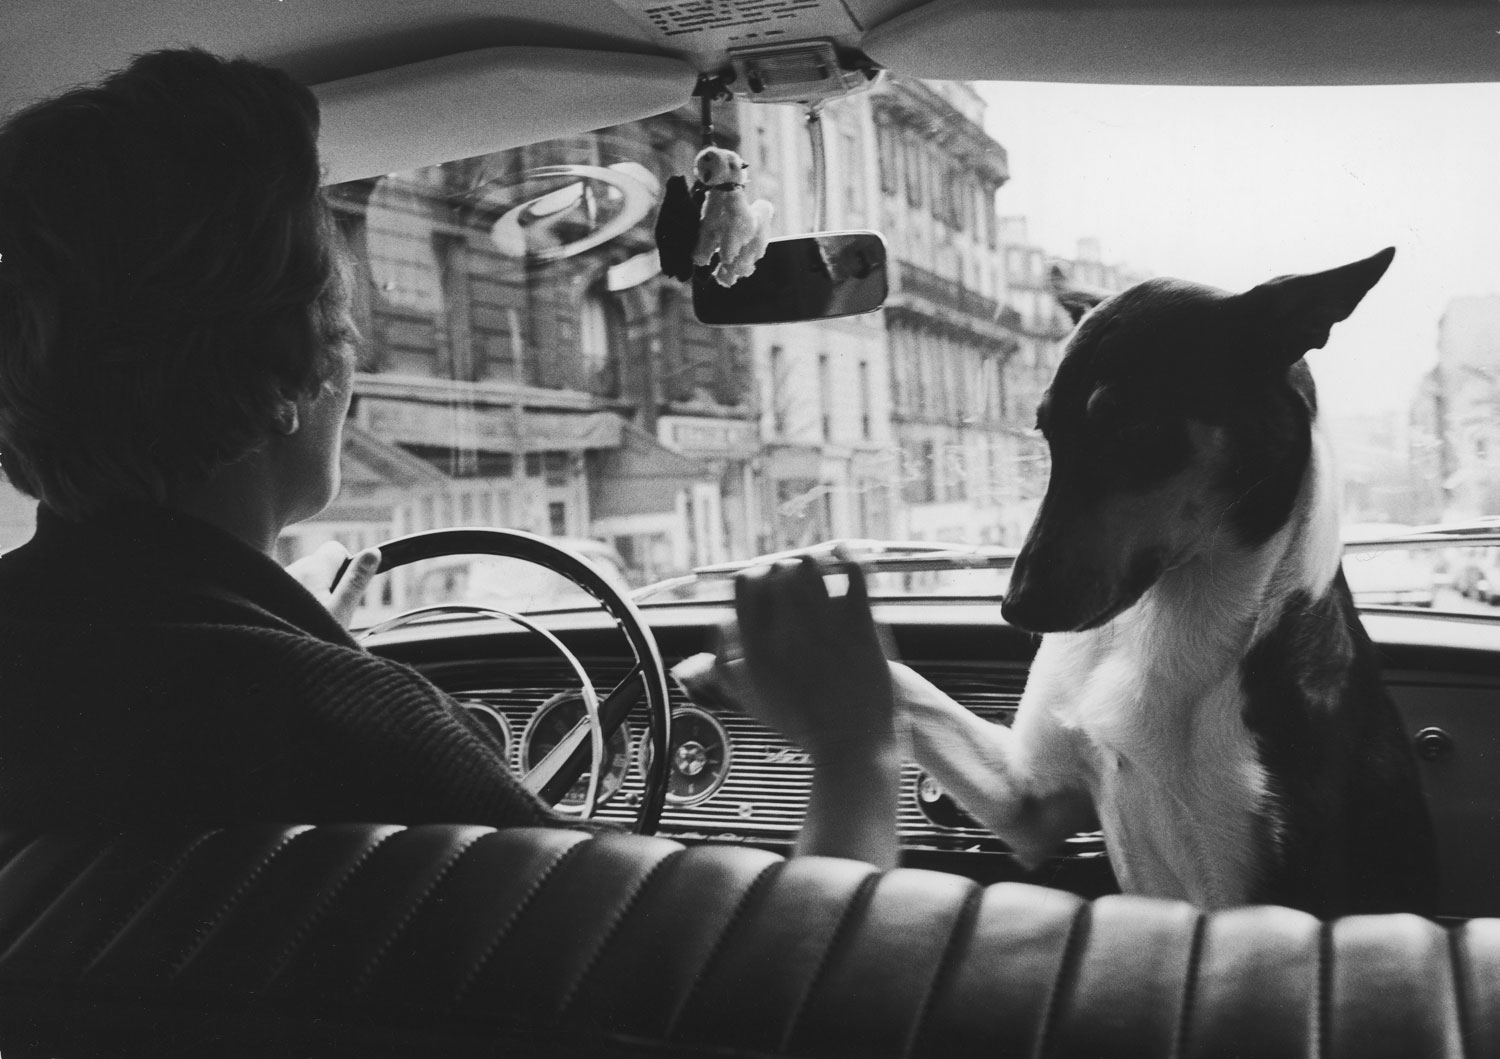 Woman taxi driver sharing front seat with pet dog, Paris, 1963.